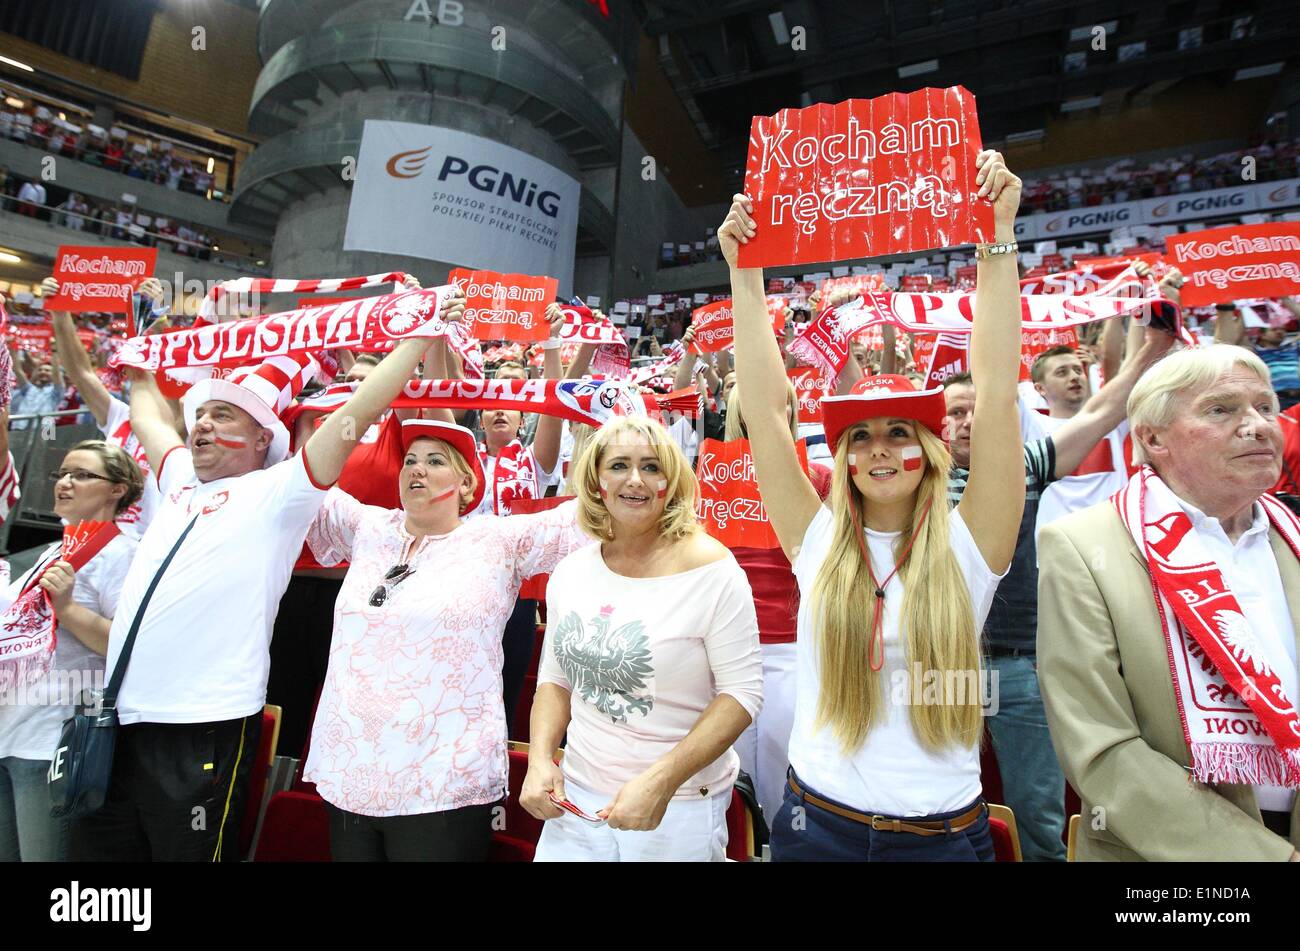 Gdansk, Poland 7th, June 2014 Quatar 2015 Men's World Handball Championship Play Off game between Poland and Germany at ERGO Arena sports hall. Polish fans react during the game. Credit:  Michal Fludra/Alamy Live News Stock Photo